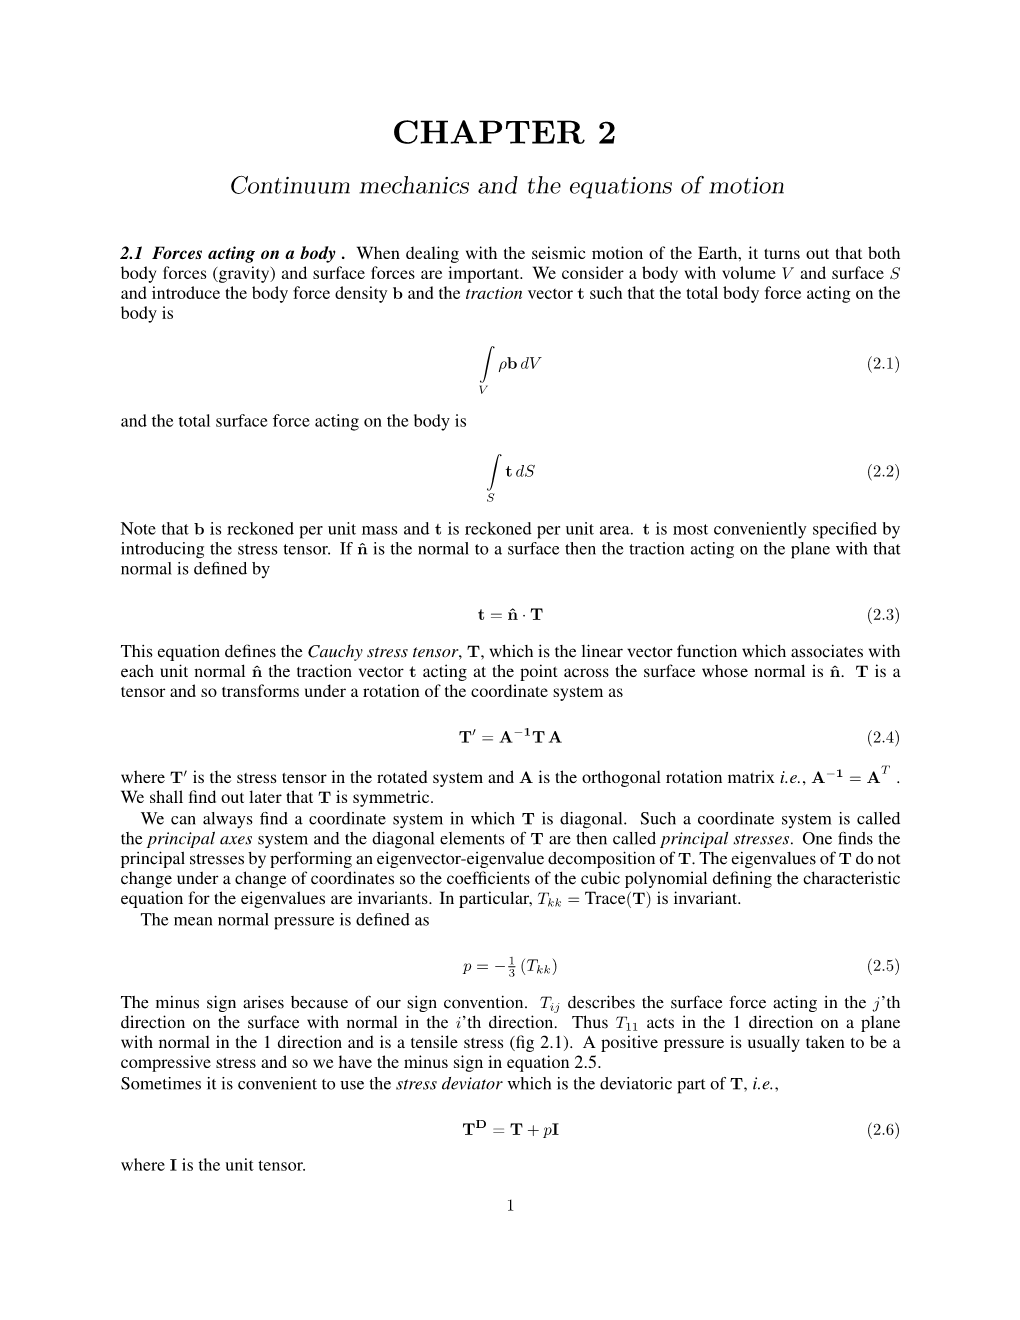 CHAPTER 2 Continuum Mechanics and the Equations of Motion